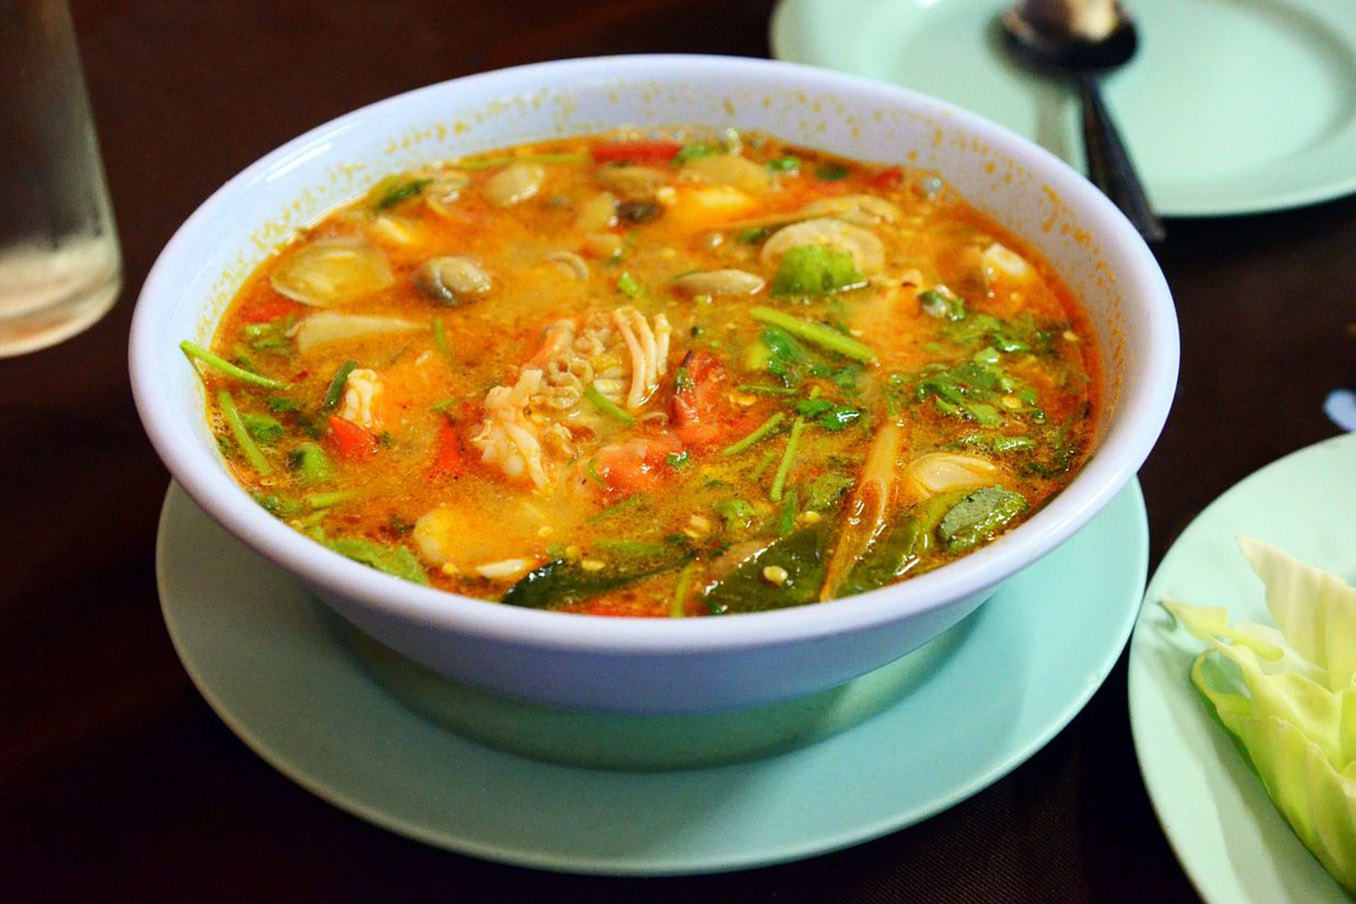 Tom yum goong nominated for Unesco recognition